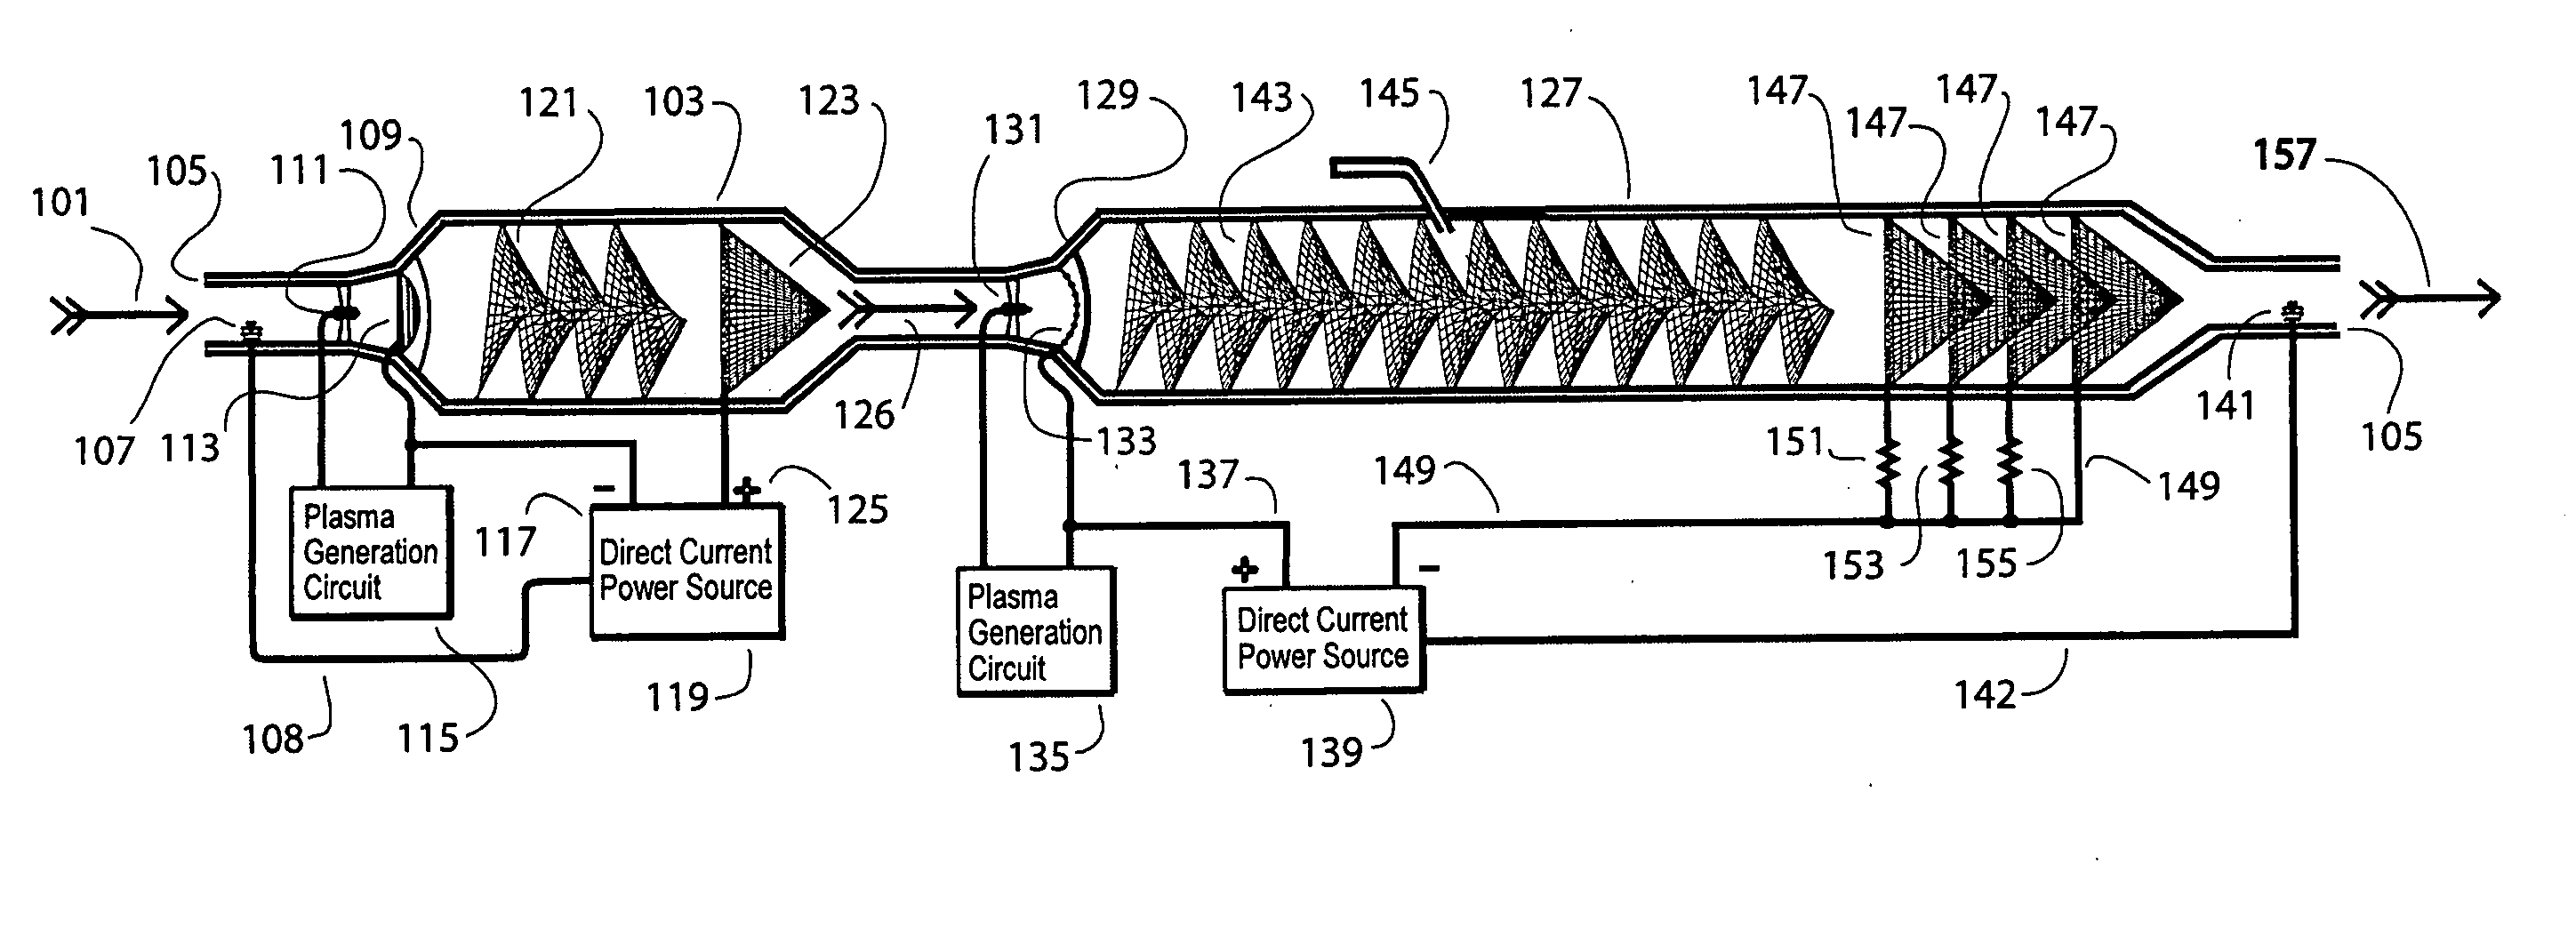 Plasma actuated electronic catalytic converter